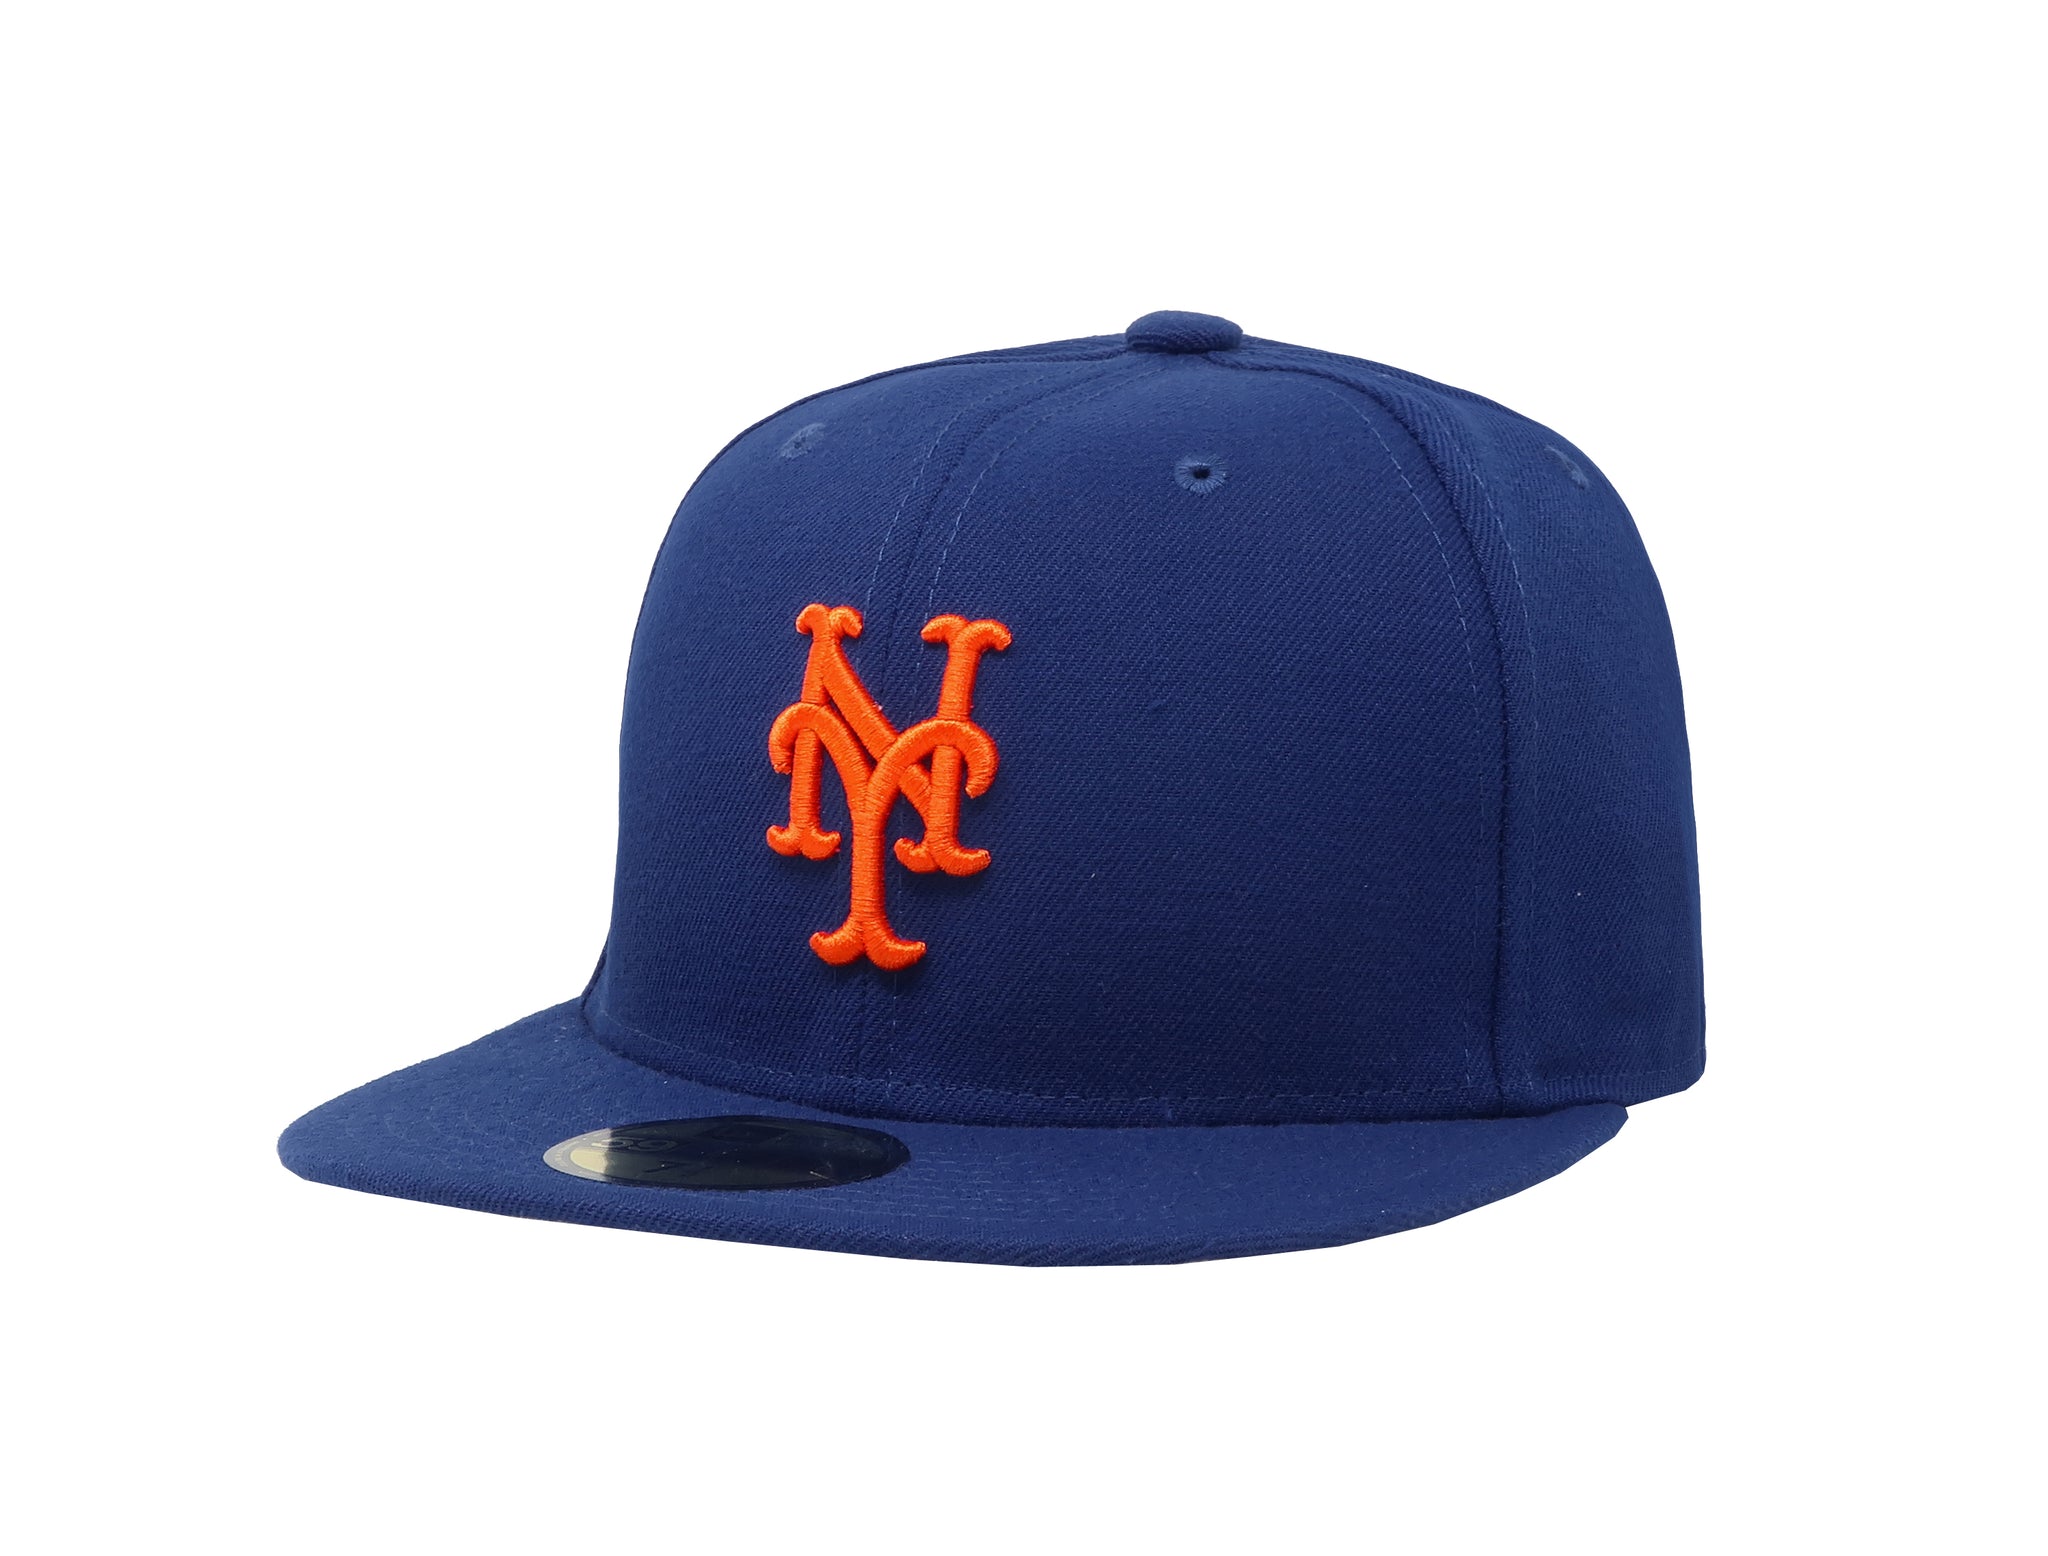 New Era 59Fifty Men's MLB New York Mets Royal Fitted Cap